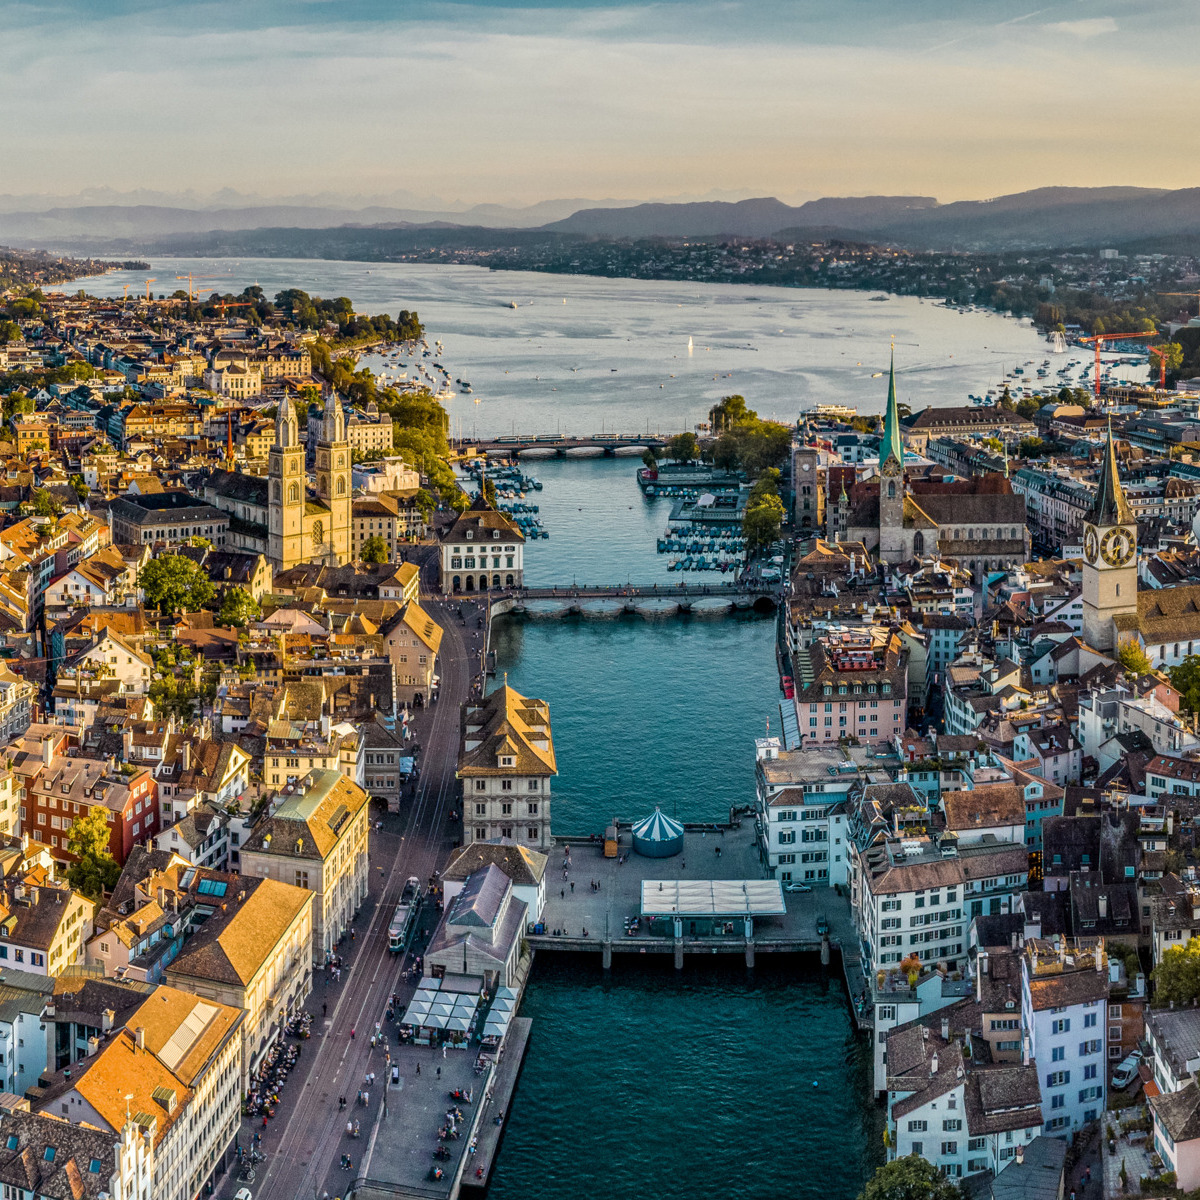 🏅 Zurich tops the IMD #SmartCity Index for the fifth time in a row! 🏅 Tech-driven and with a strong focus on sustainability, Zurich offers top-notch infrastructure and online services. #eventprofs #eventplanning #swisstainable #meetinzurich